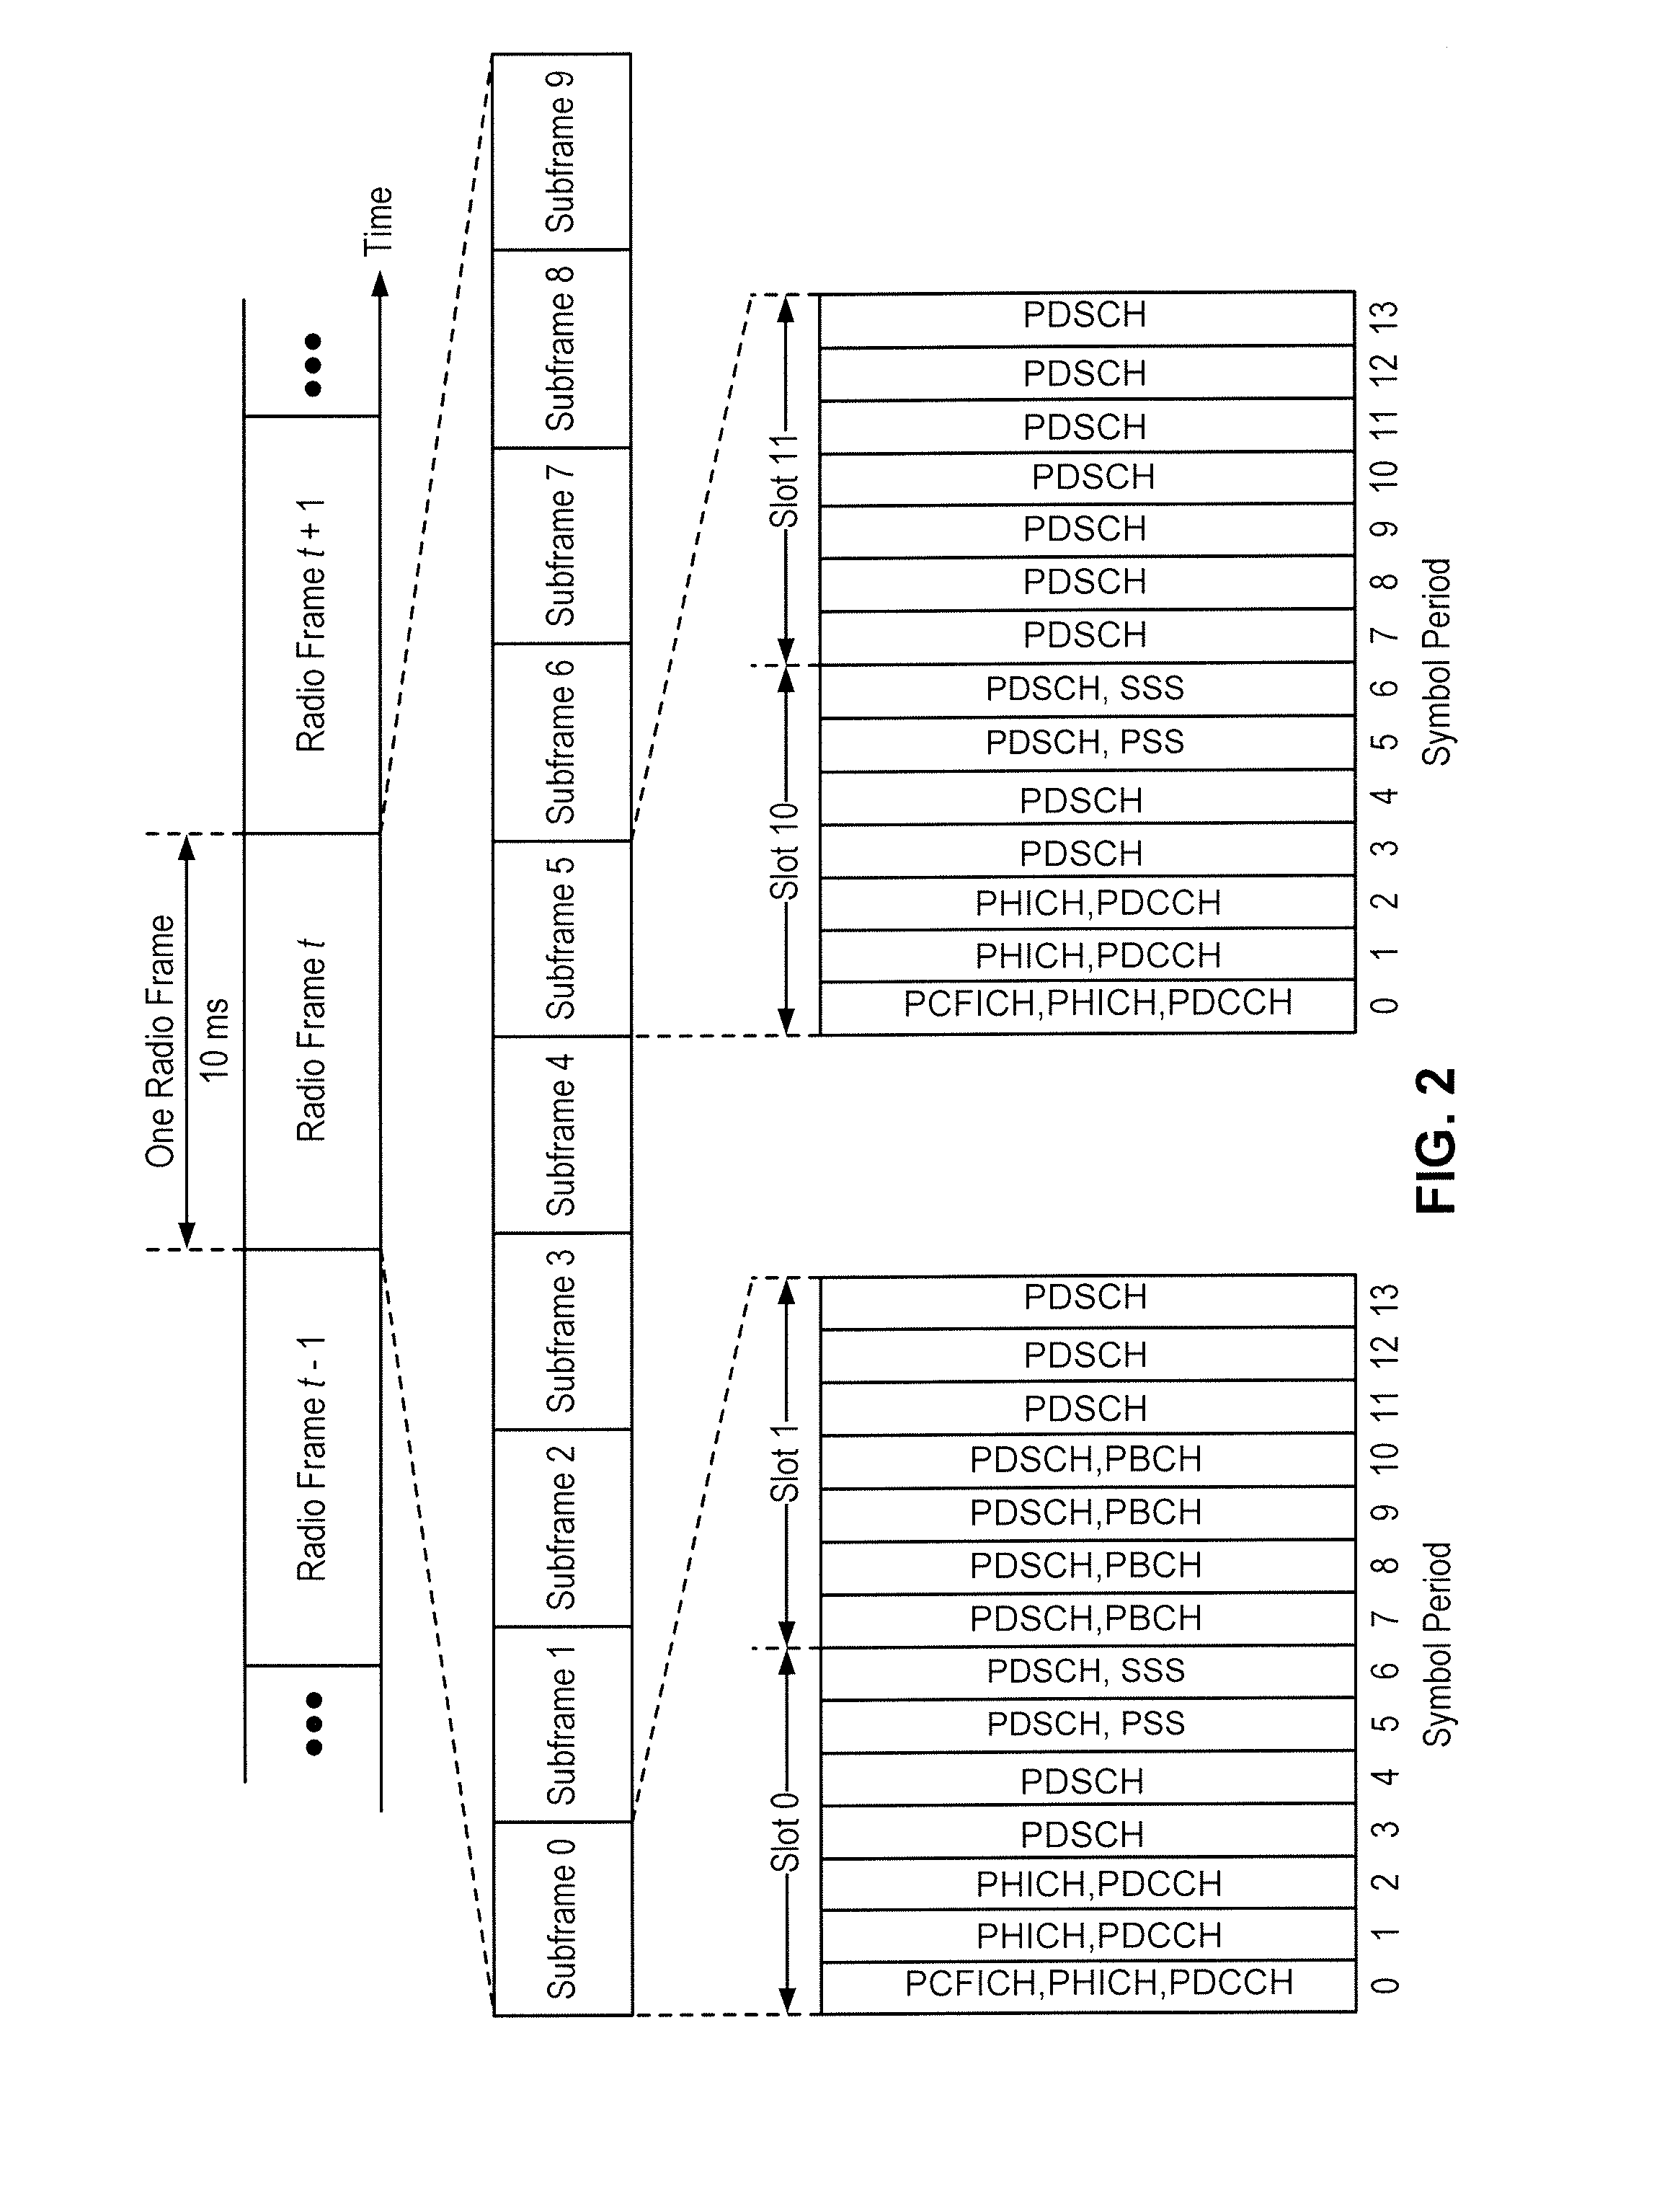 Techniques for performing carrier sense adaptive transmission in unlicensed spectrum